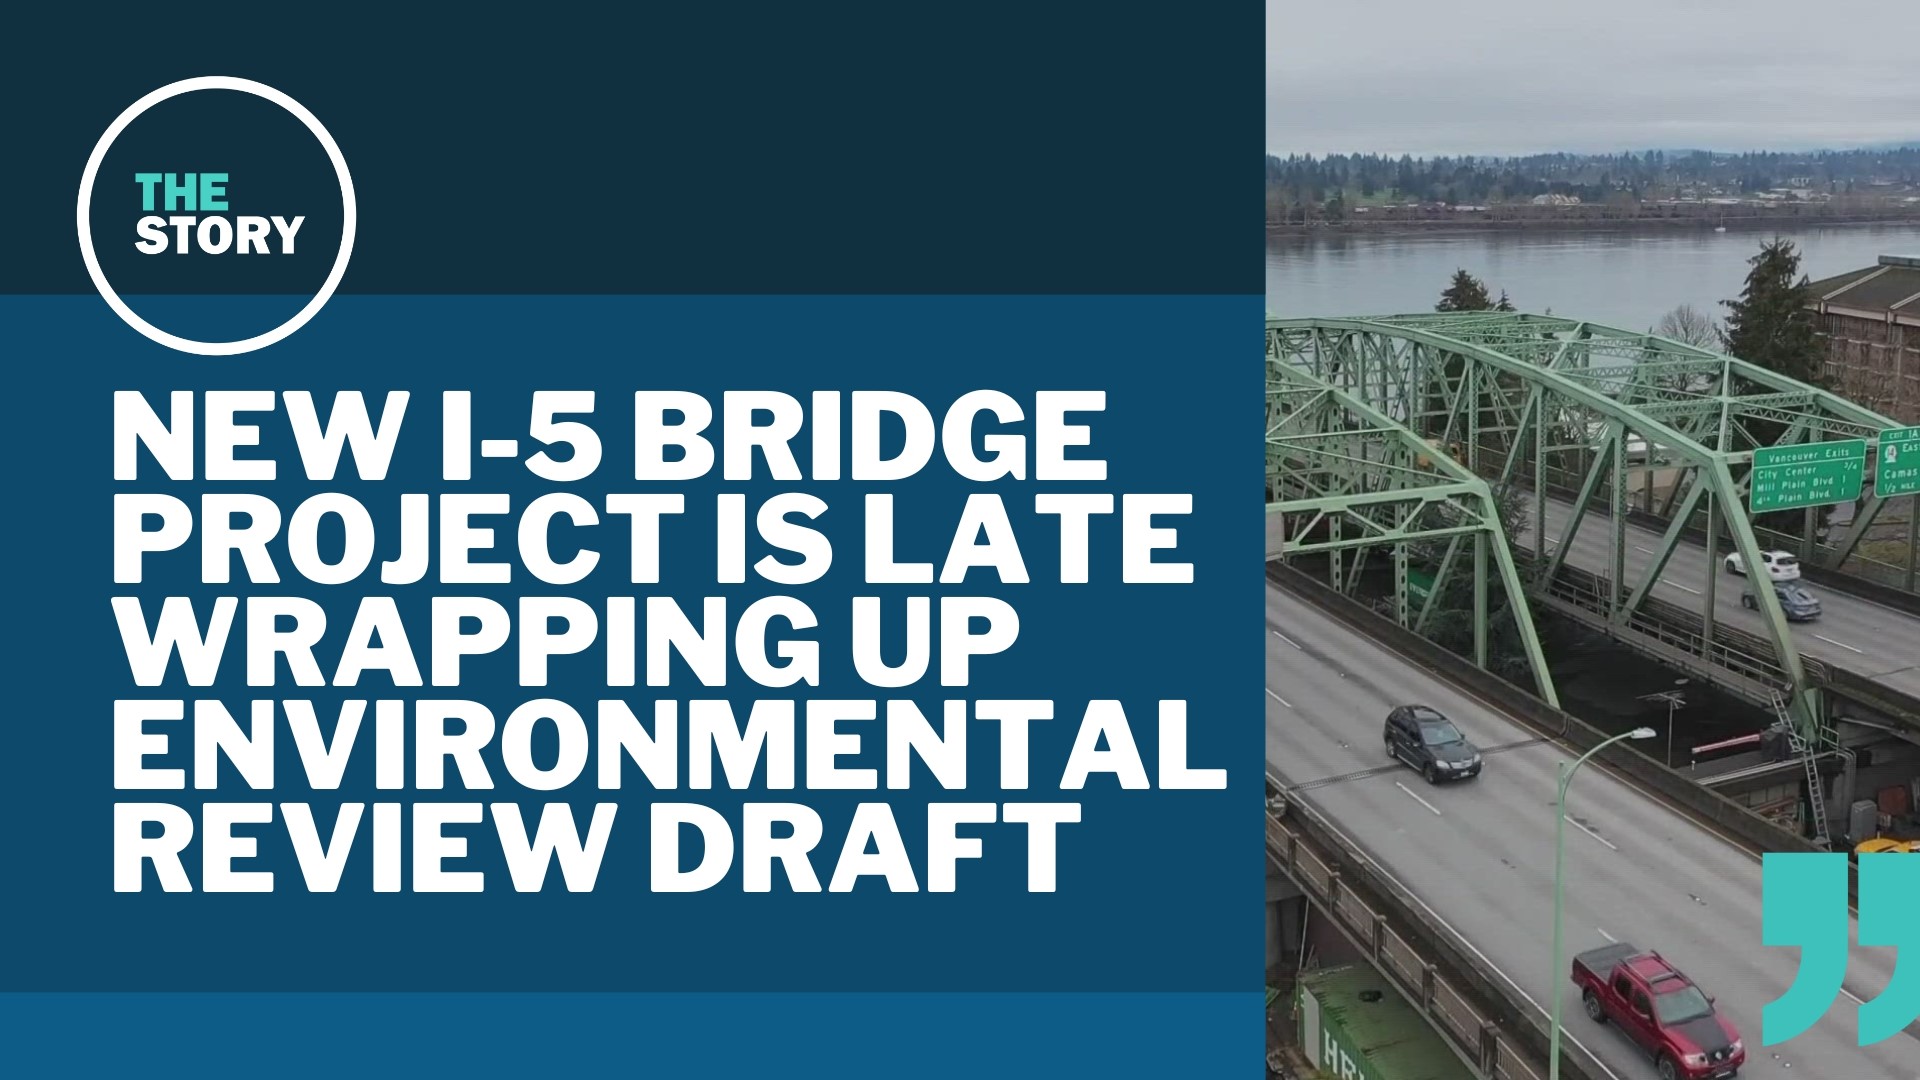 The federal review process is taking longer than originally expected, potentially pushing back the construction timeline. But tolling on the old bridge may go ahead.